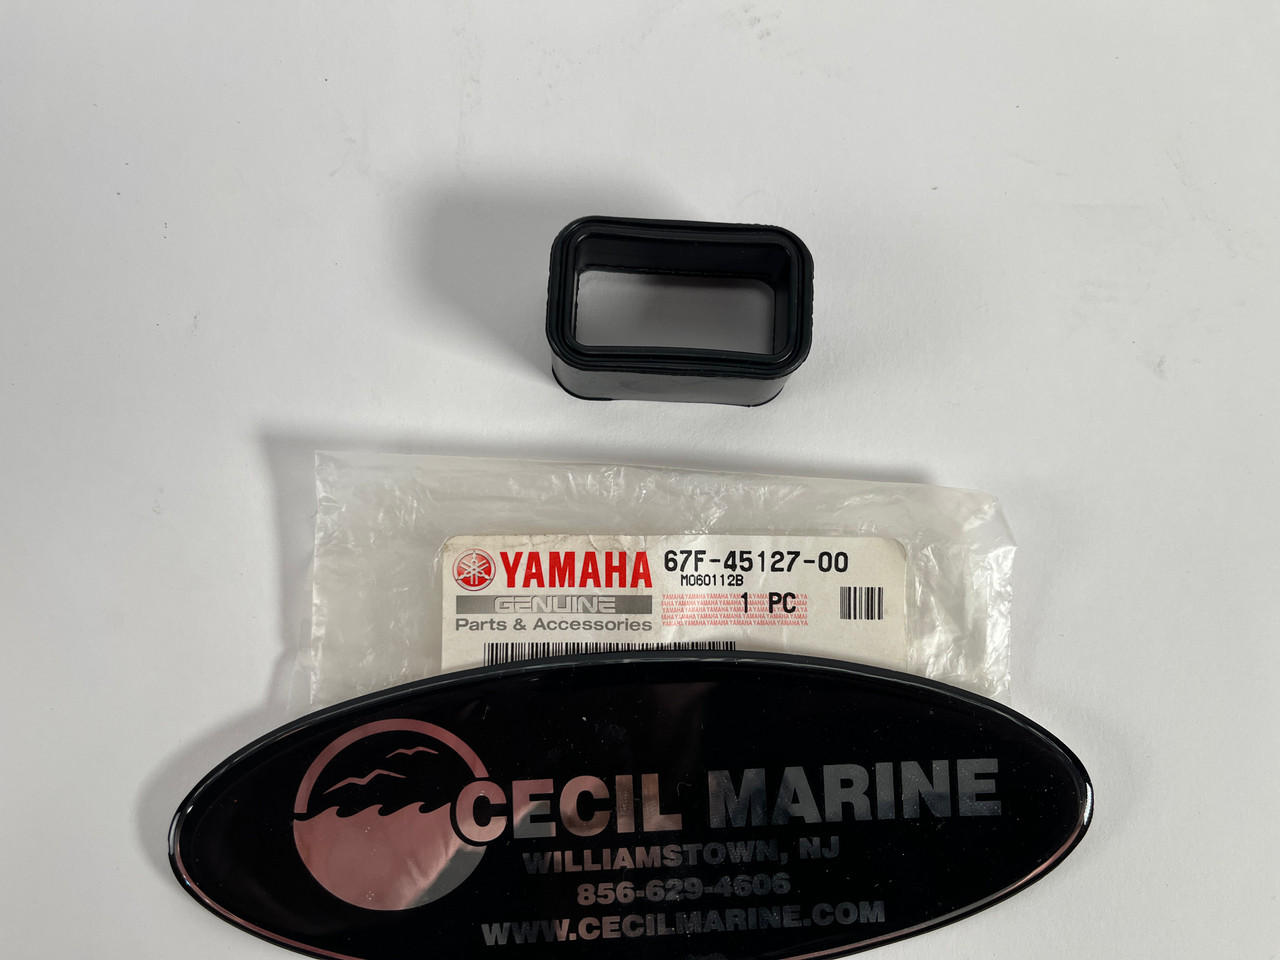 $5.99* GENUINE YAMAHA no tax* SEAL 67F-45127-00-00 *In Stock & Ready To Ship